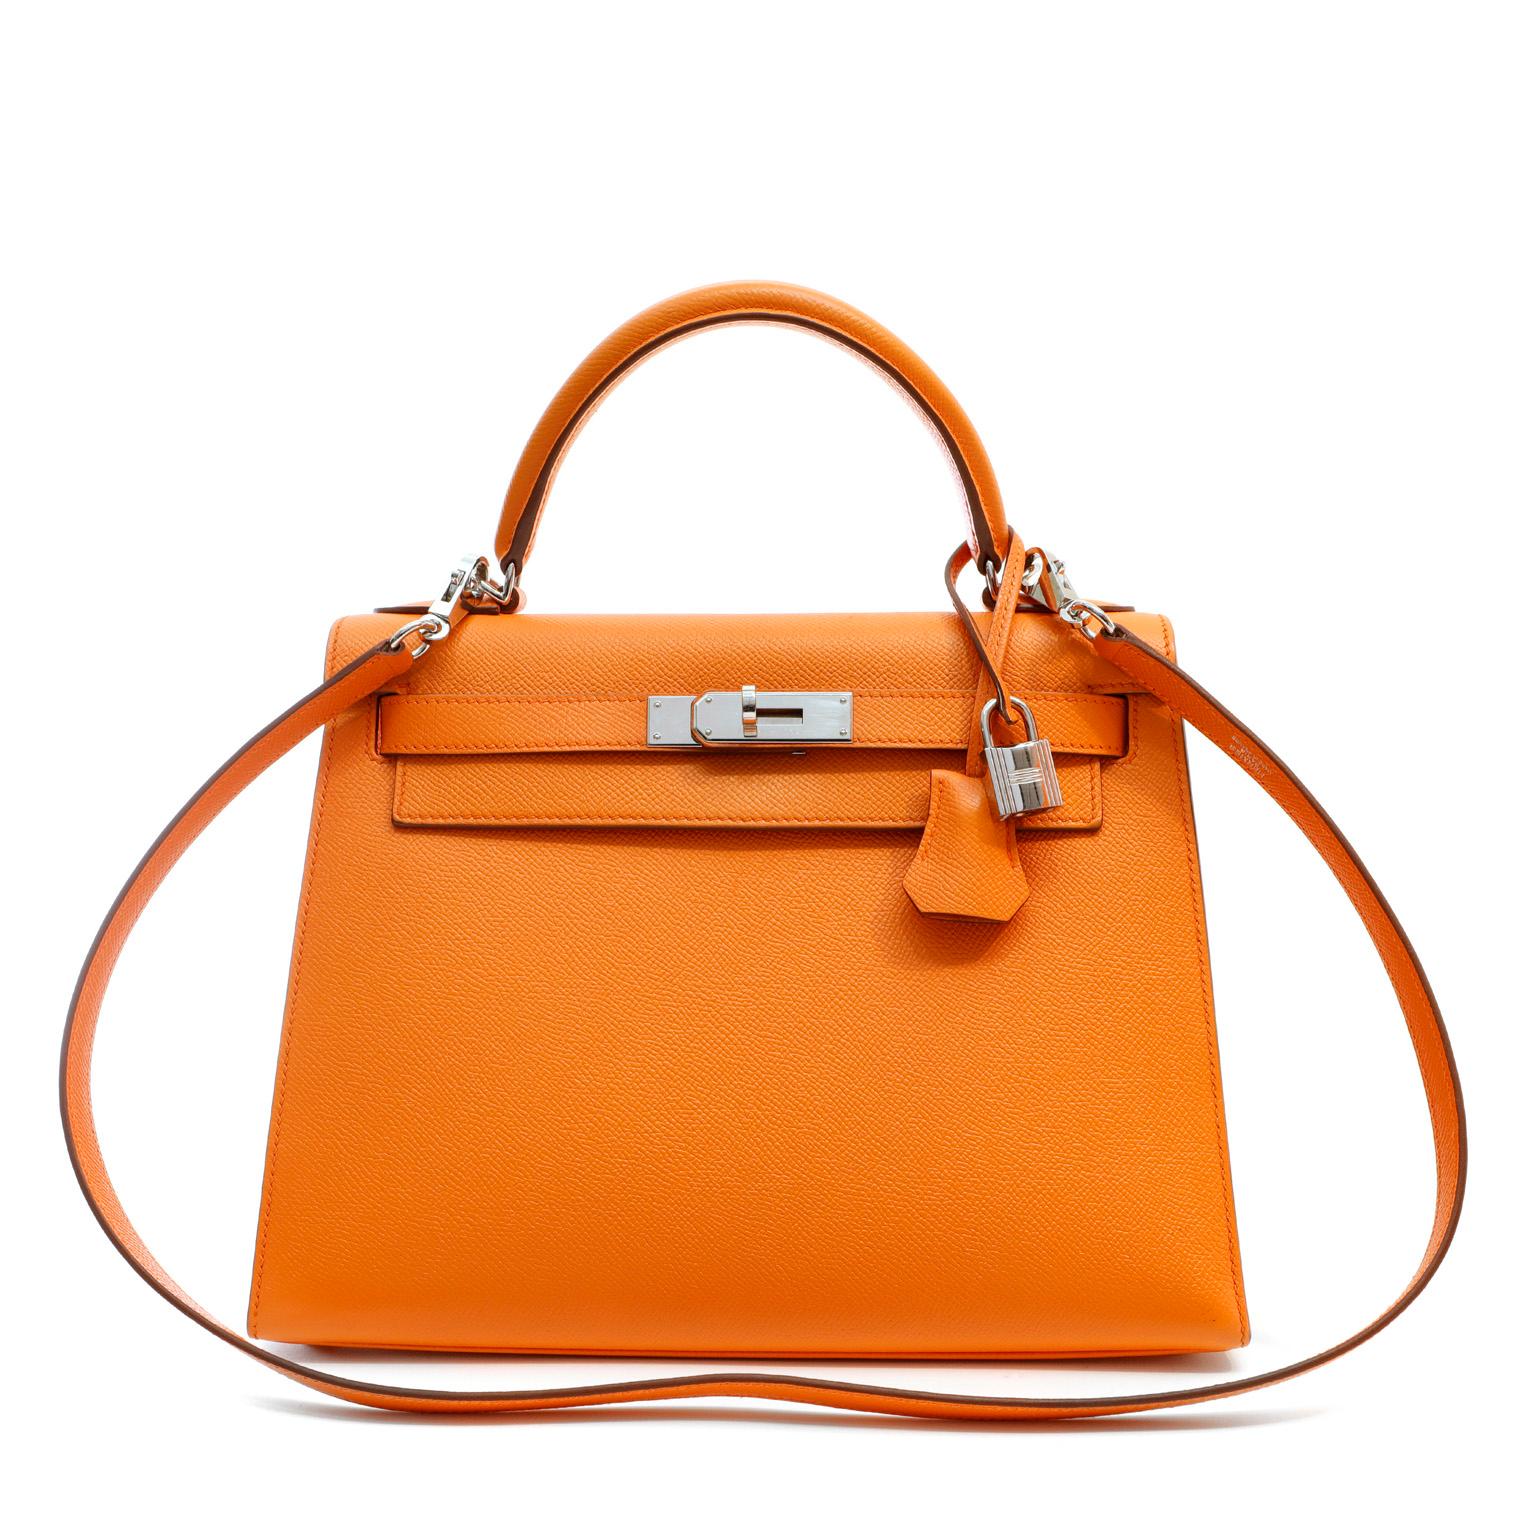 This authentic Hermès Orange Epsom 28 cm Kelly Sellier is in pristine condition.     Hermès bags are considered the ultimate luxury item worldwide.  Each piece is handcrafted with waitlists that can exceed a year or more.  The ladylike Kelly is